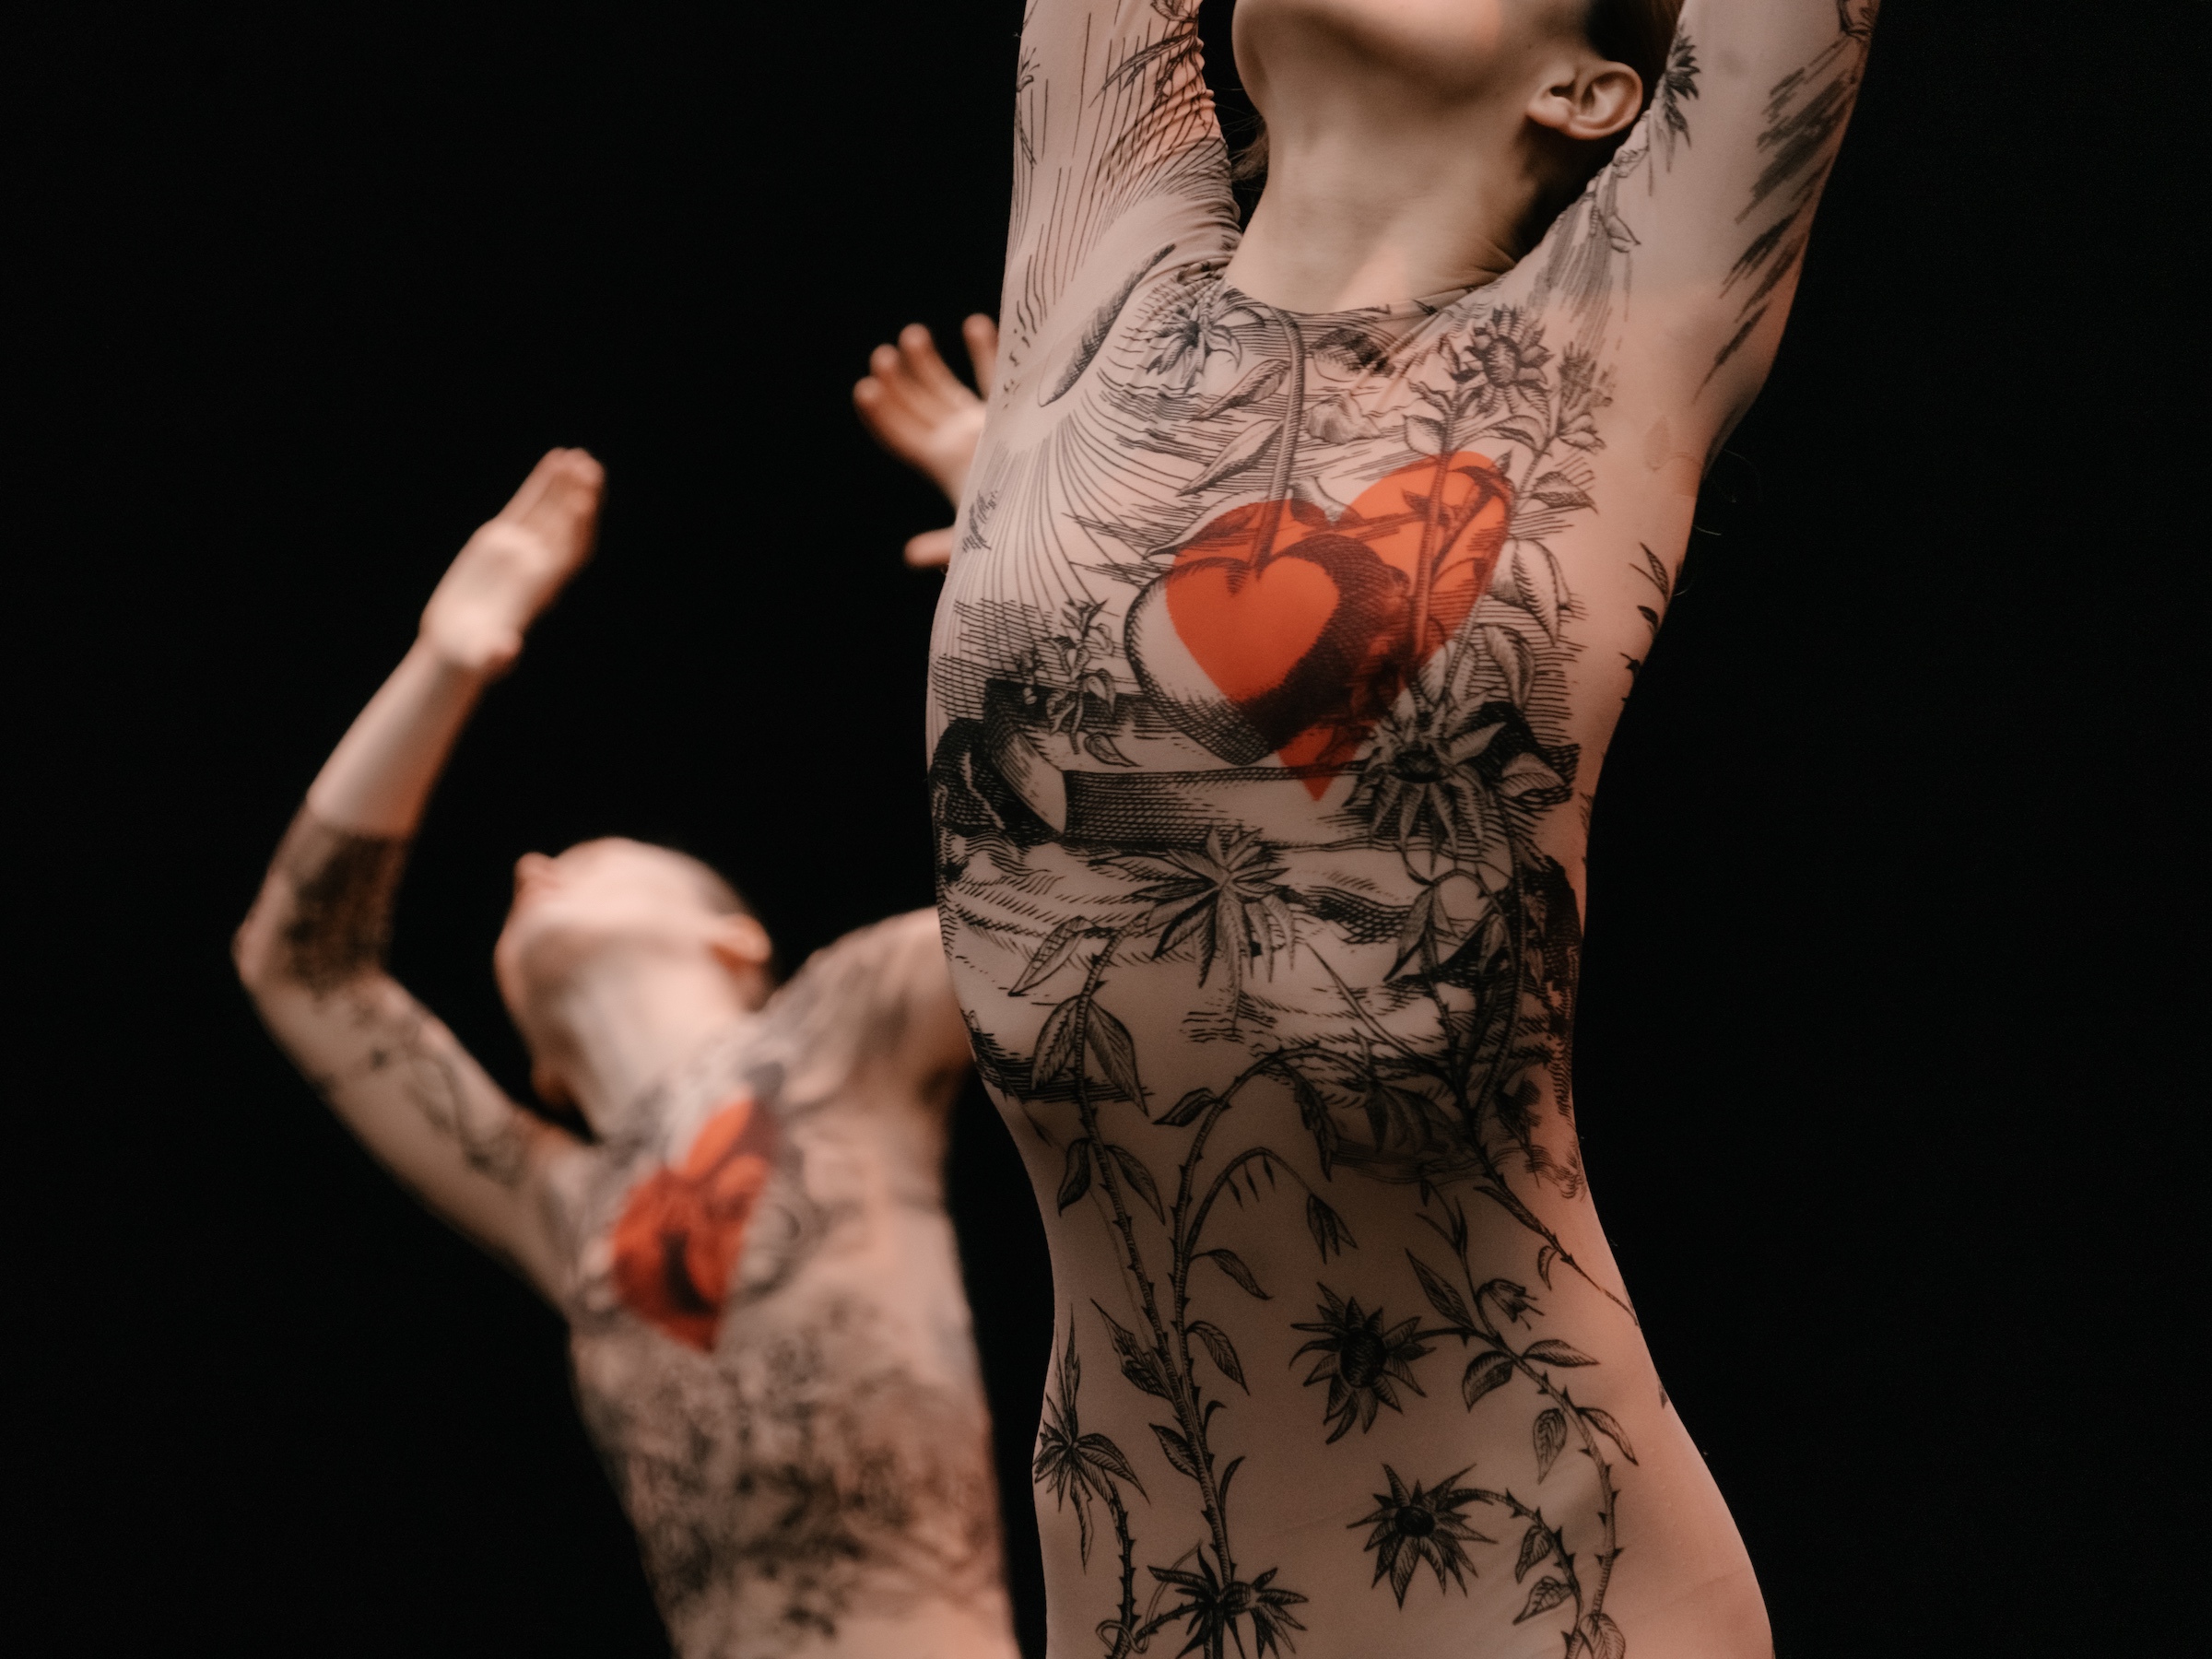 Dancers in costumes that look like body tattoos but with a red heart drawn where the heart is.